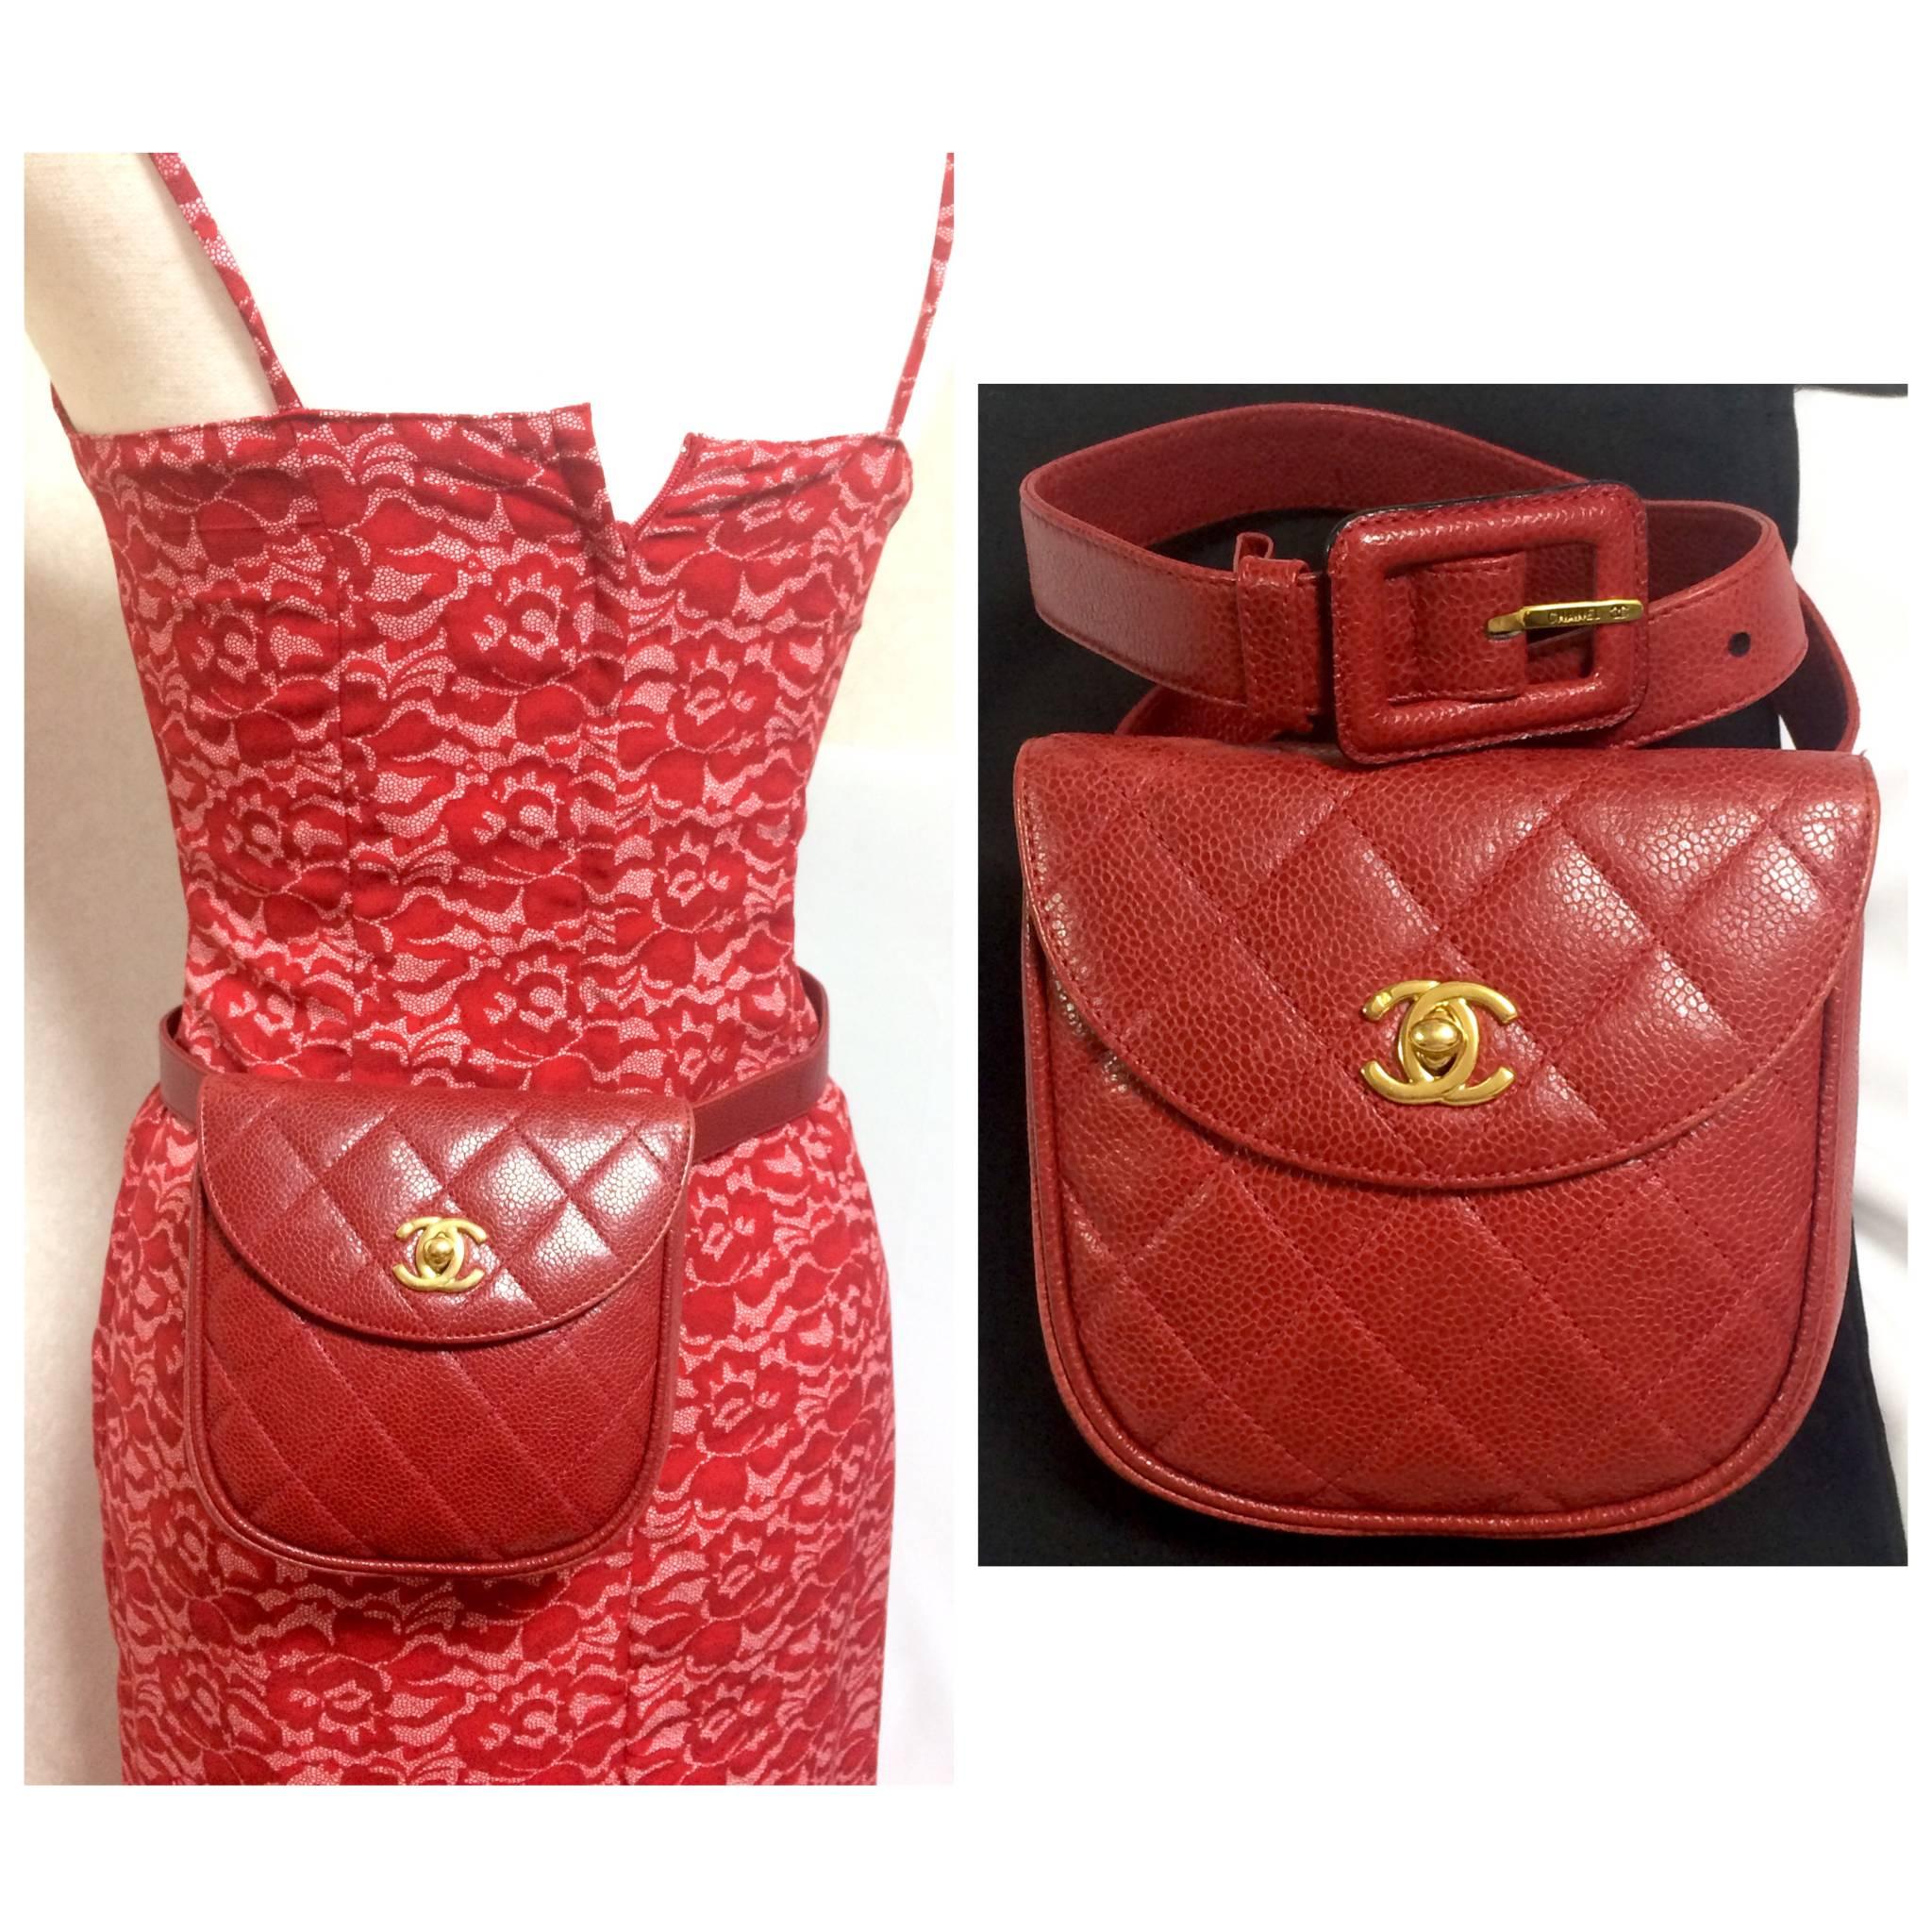 Vintage CHANEL 2.55 red caviar leather waist purse, fanny pack with golden cc. 5